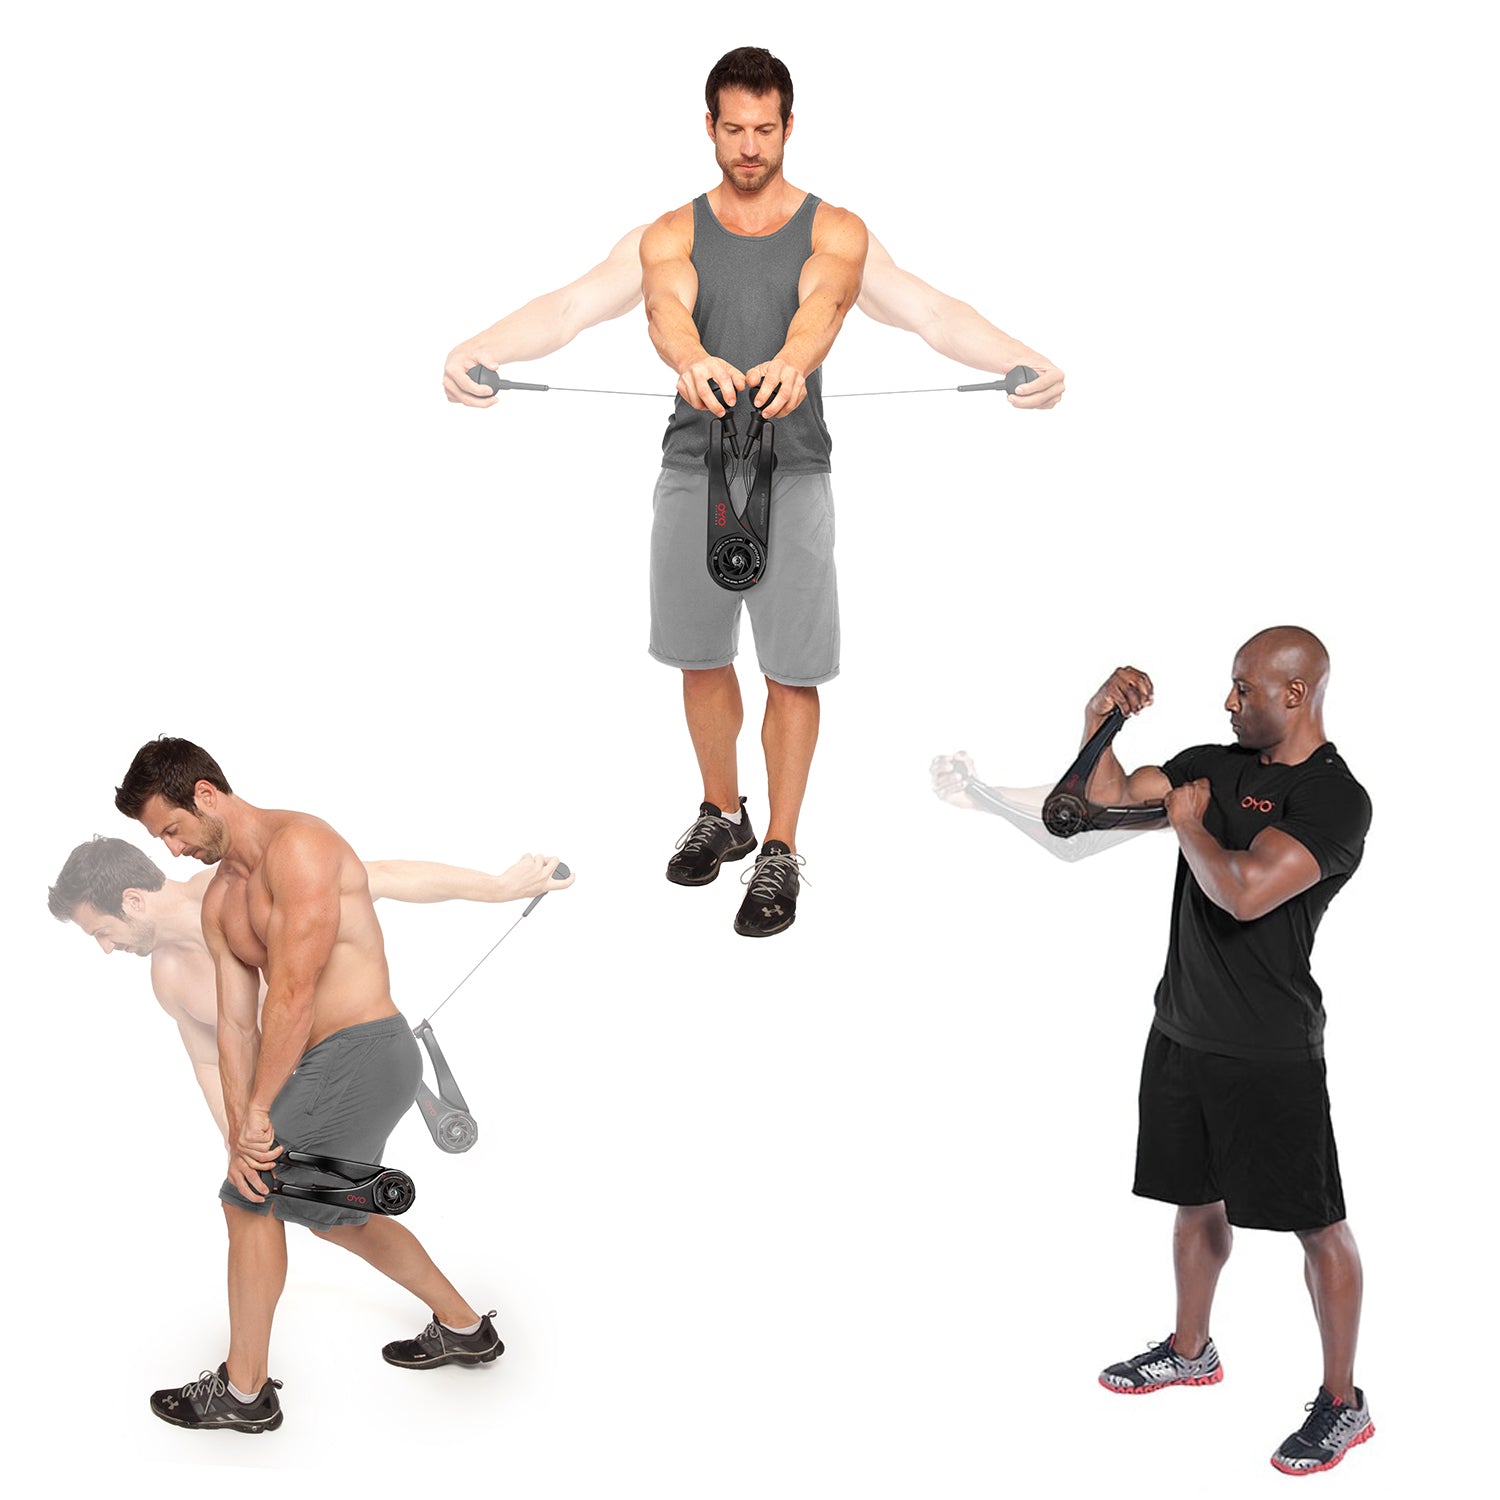 OYO Personal Gym - Full Body Portable Gym Equipment Set for Exercise at  Home, Office or Travel - SpiraFlex Strength Training Fitness Technology -  NASA Technology 